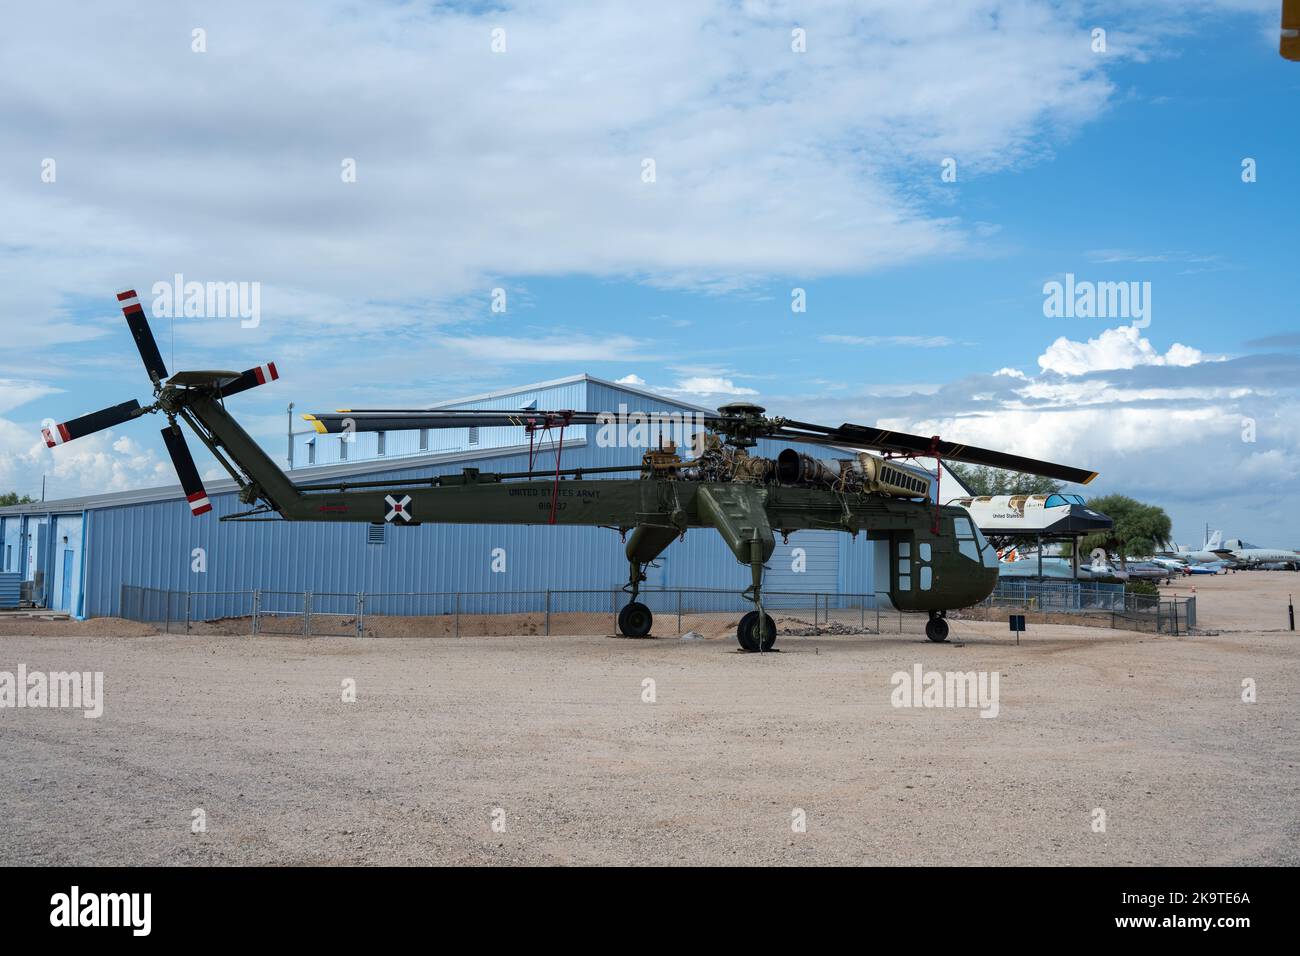 Un elicottero Sikorsky S-64 Skygrup in mostra presso il Pima Air and Space Museum Foto Stock